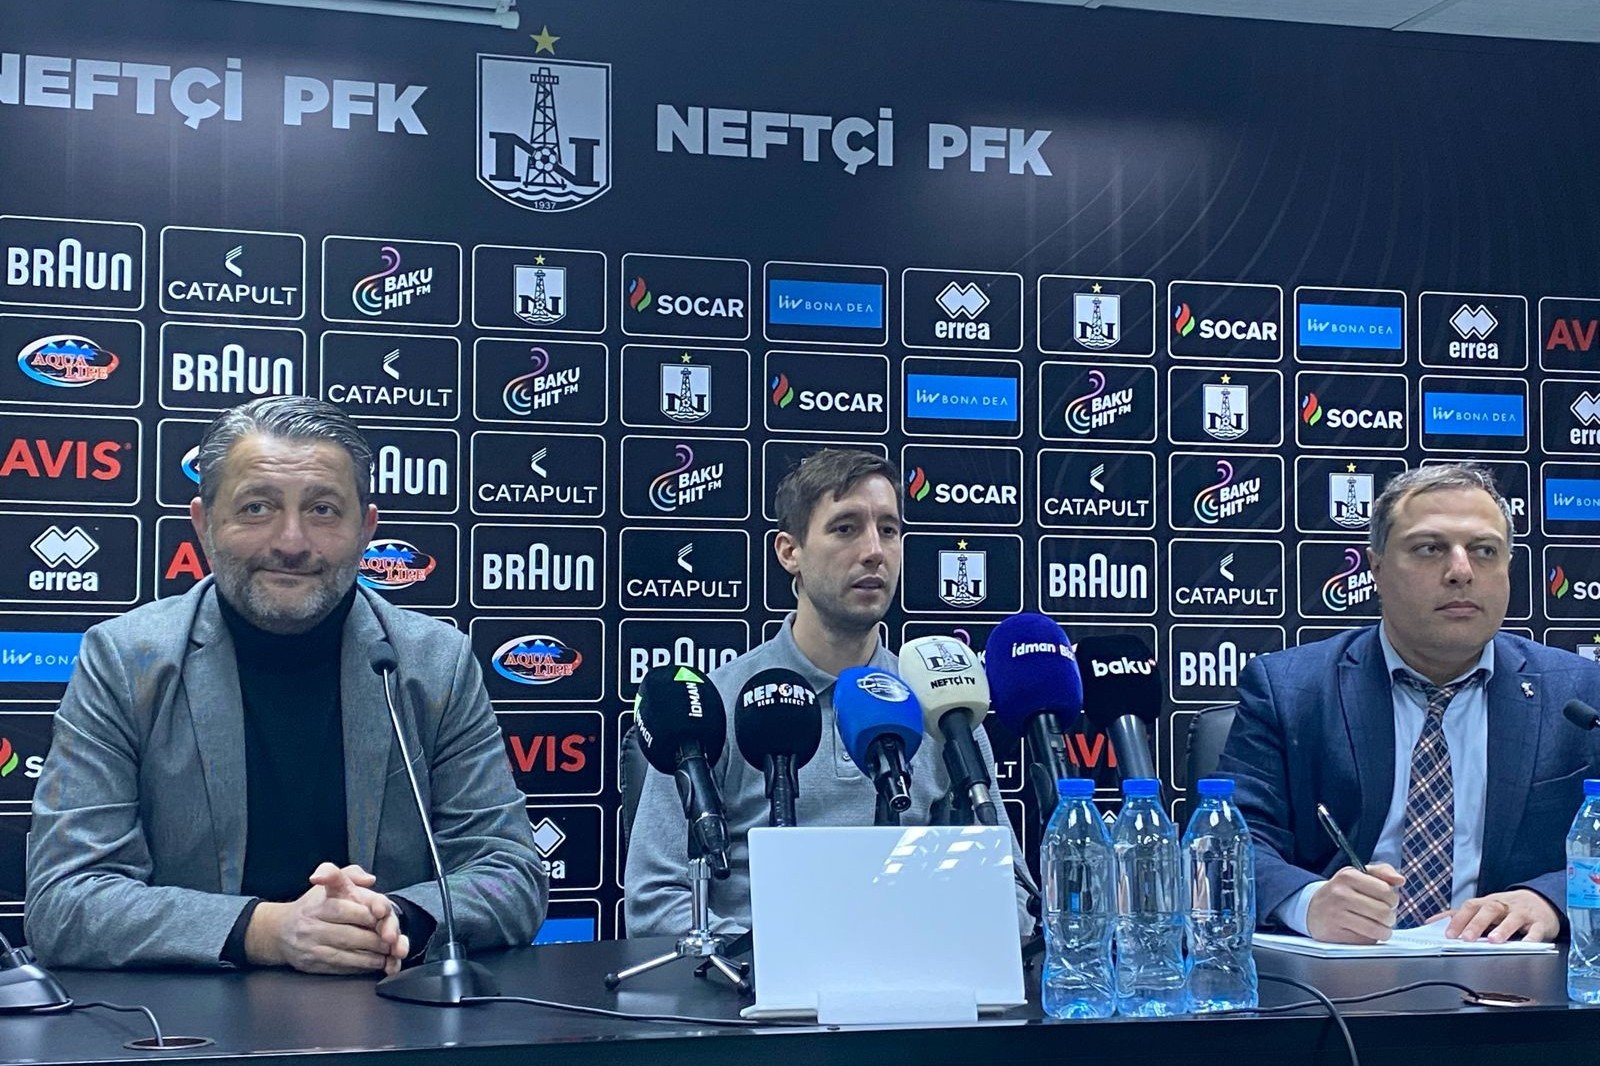 Filip Ozobic: "I played for Qarabag for 5 years, now I am going forward with Neftchi"